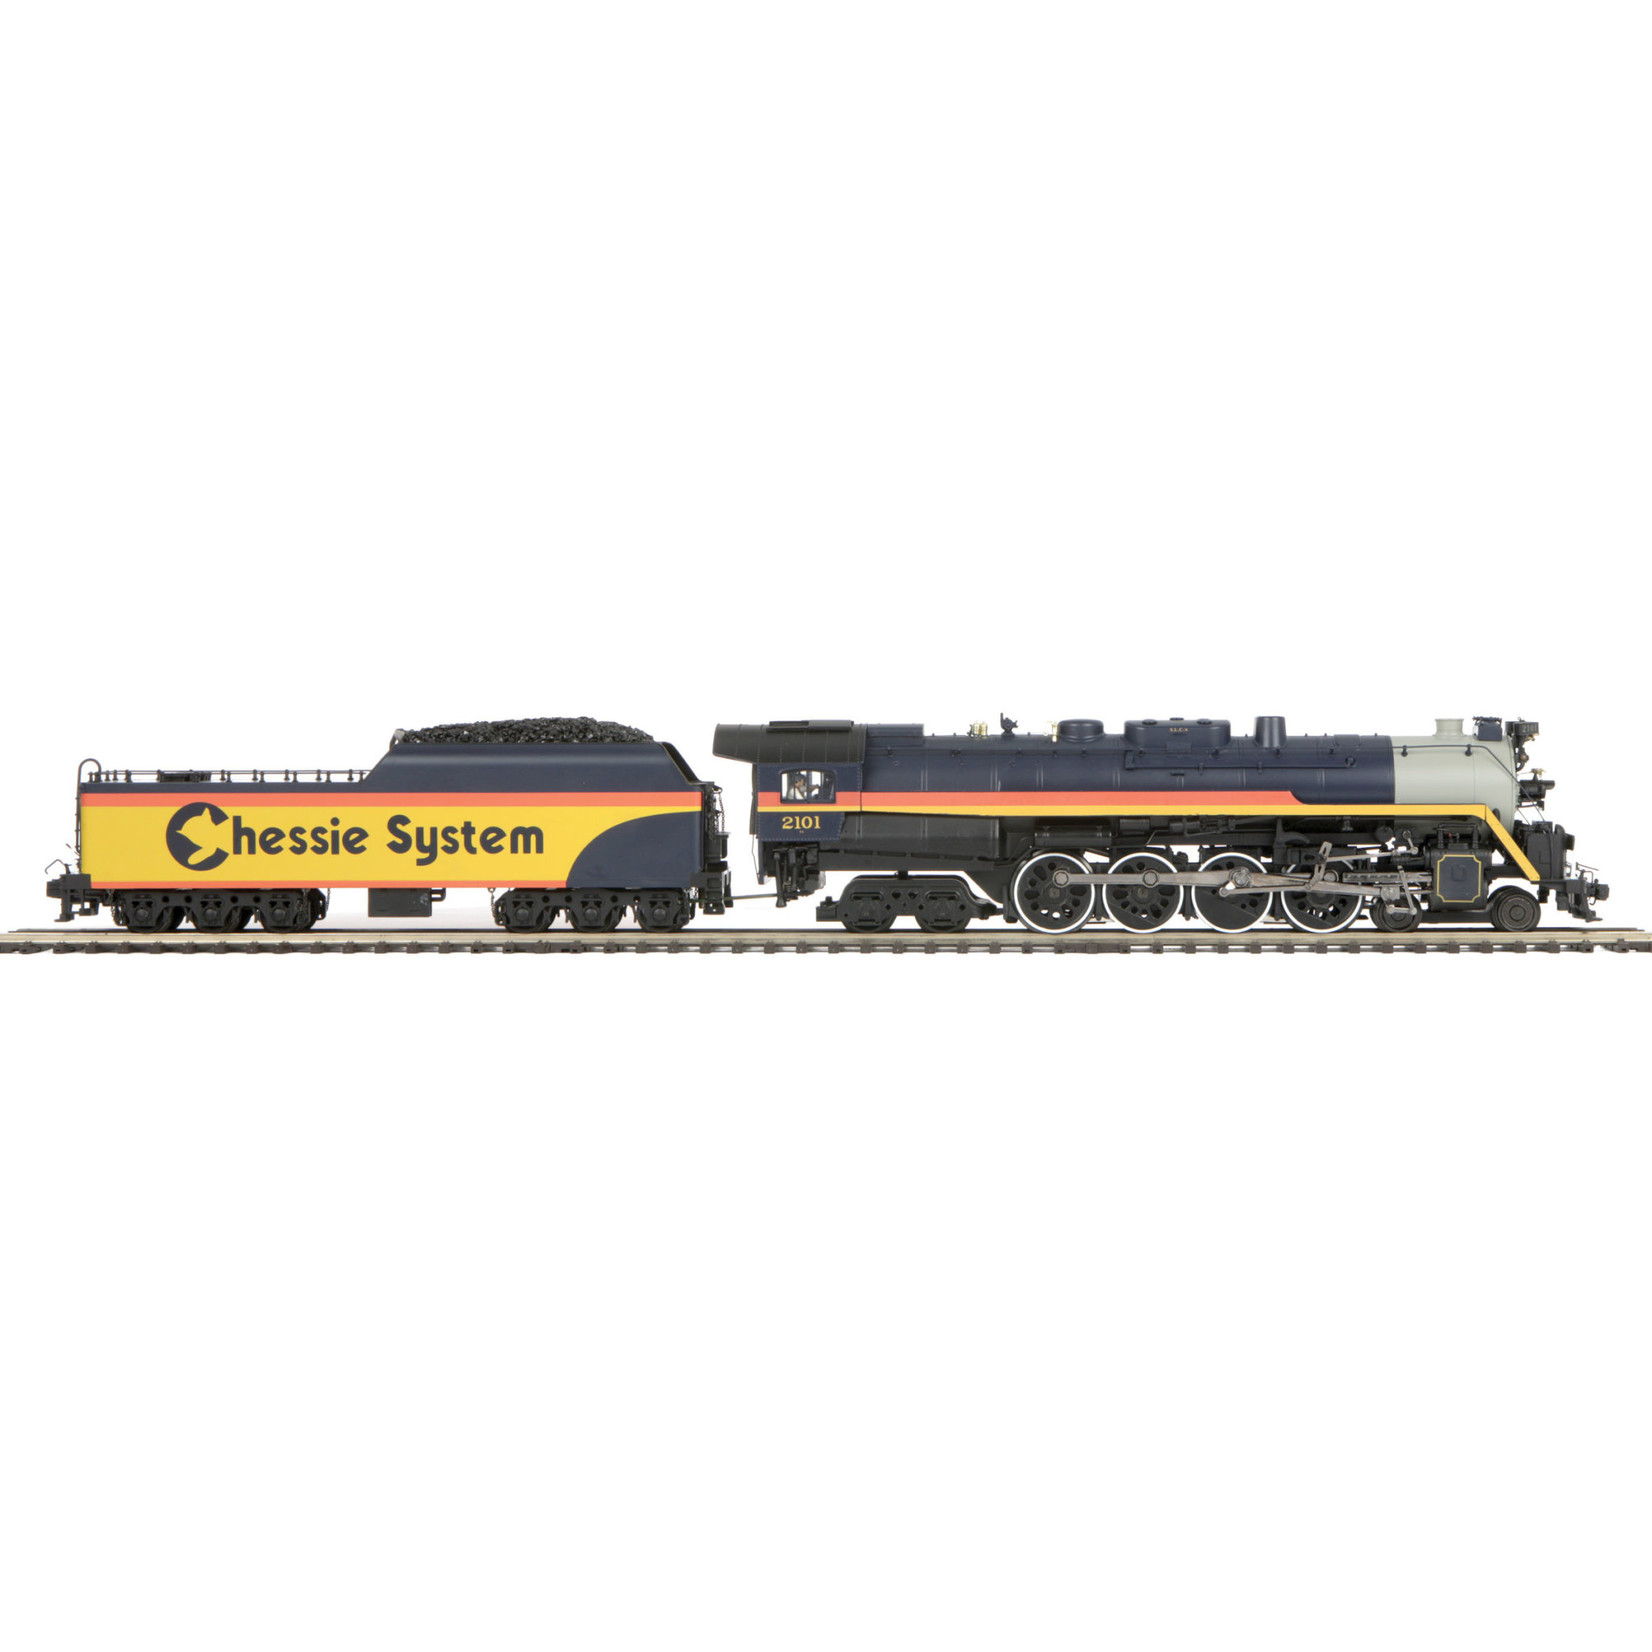 MTH Electric Trains O Scale Chessie System 4-8-4 T-1 Steam Locomotive